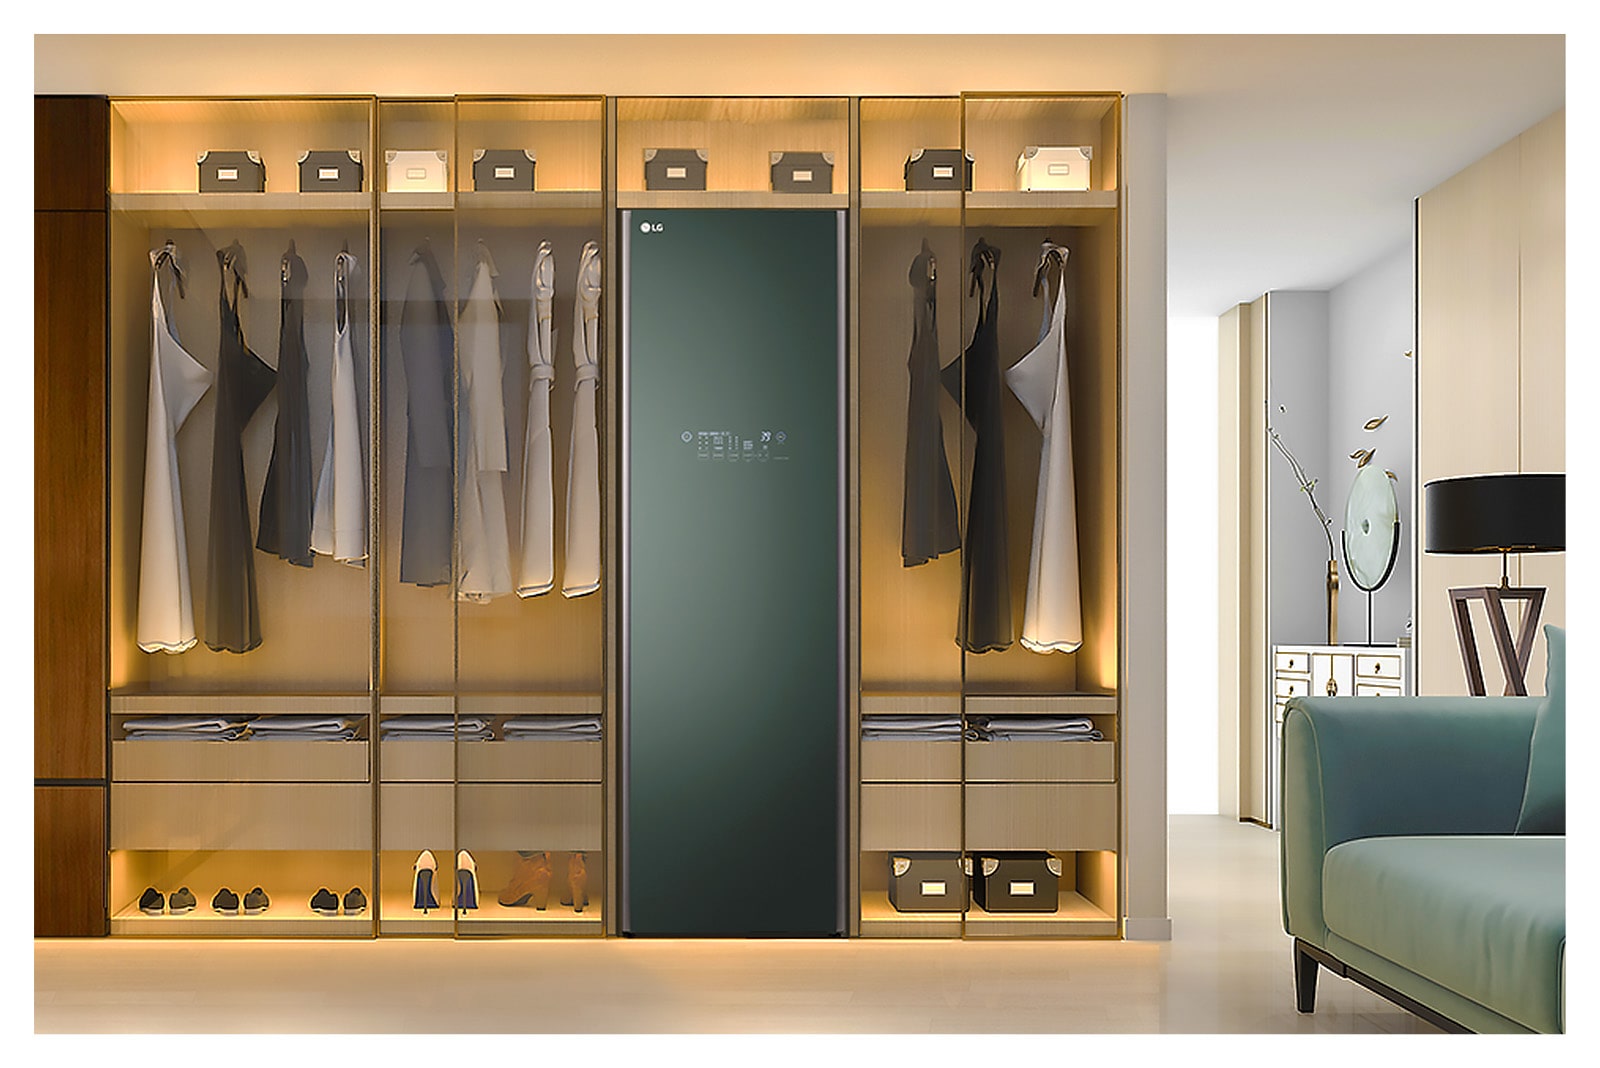 It shows LG Styler Objet Collection stood with built-in closet in dressing room.